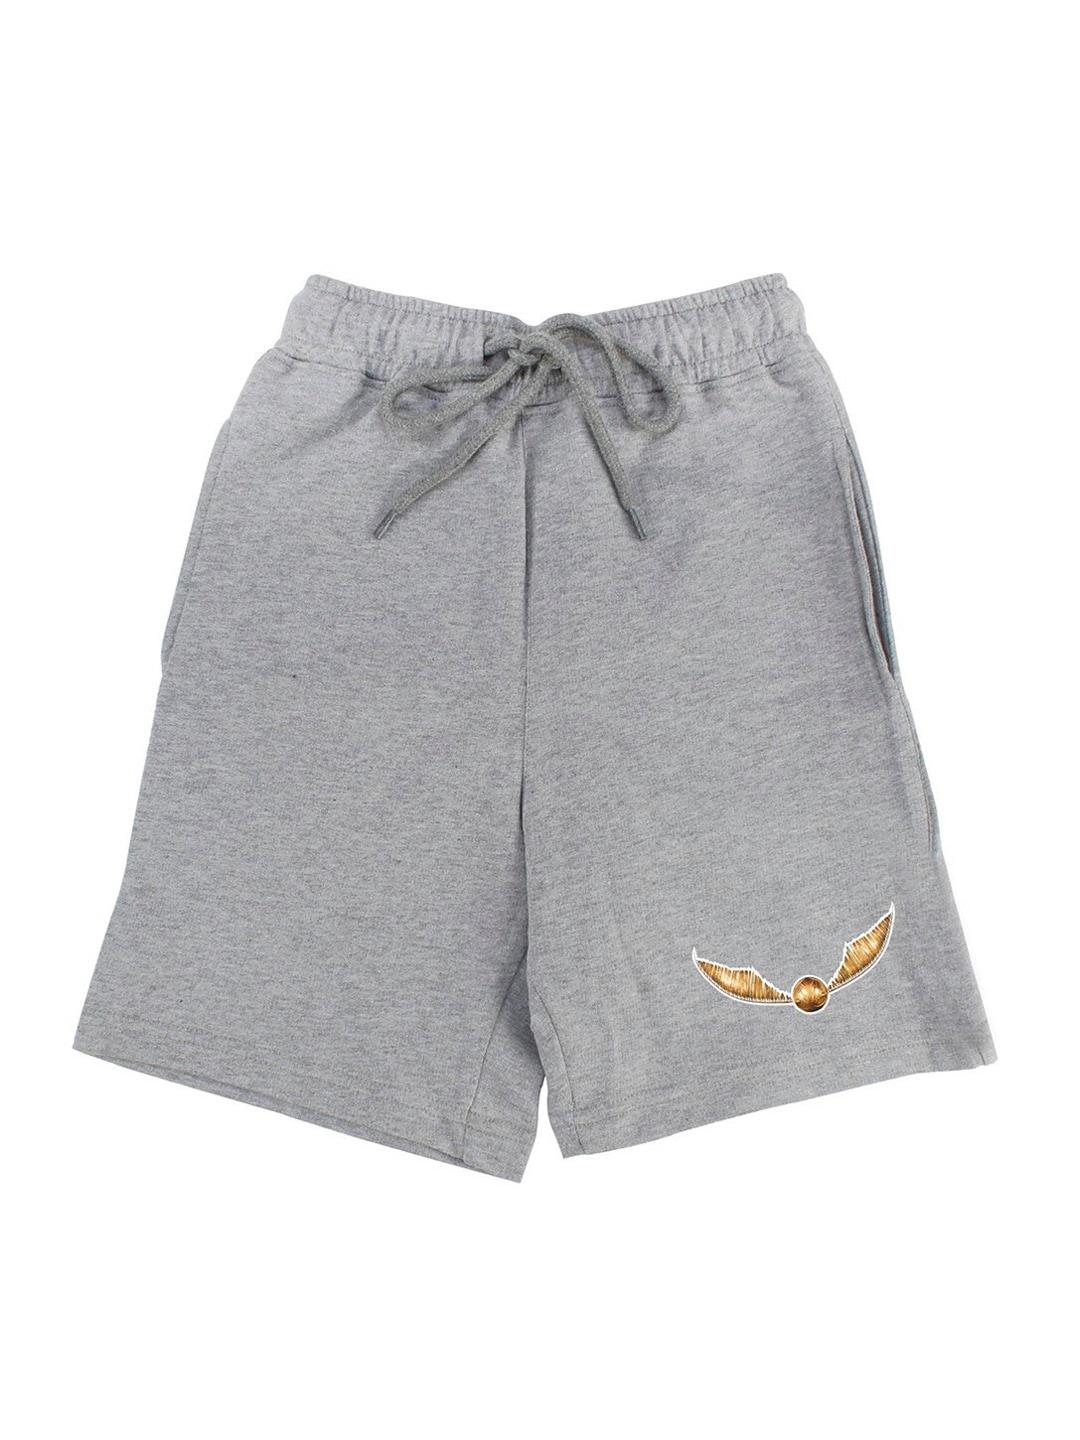 Harry Potter by Wear Your Mind Boys Grey Harry Potter Printed Shorts